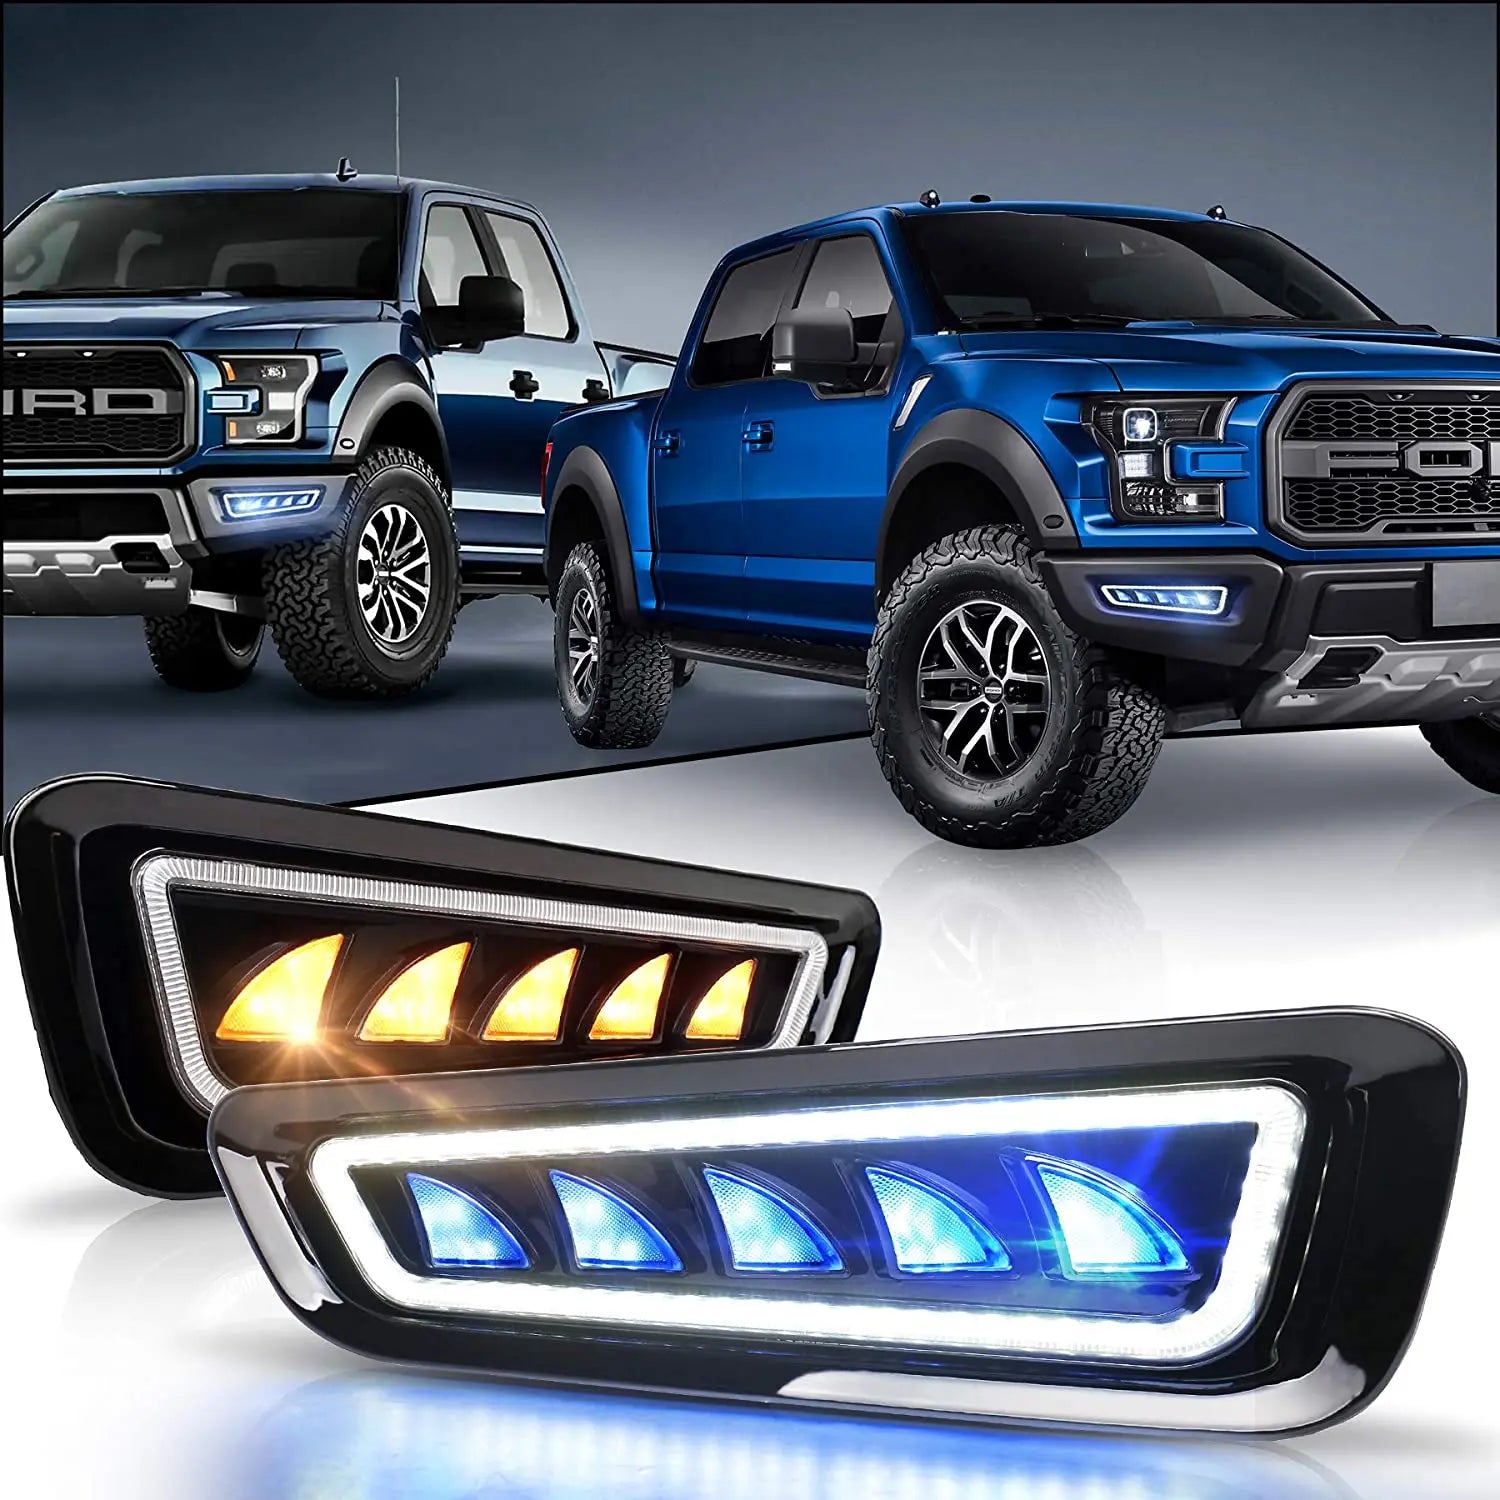 Flashark Fog Lights with Blue/White LED Daytime Running Light Amber Sequential Turn Signals Compatible for Ford F150 Raptor 2017-2020 (2 packs) Flashark